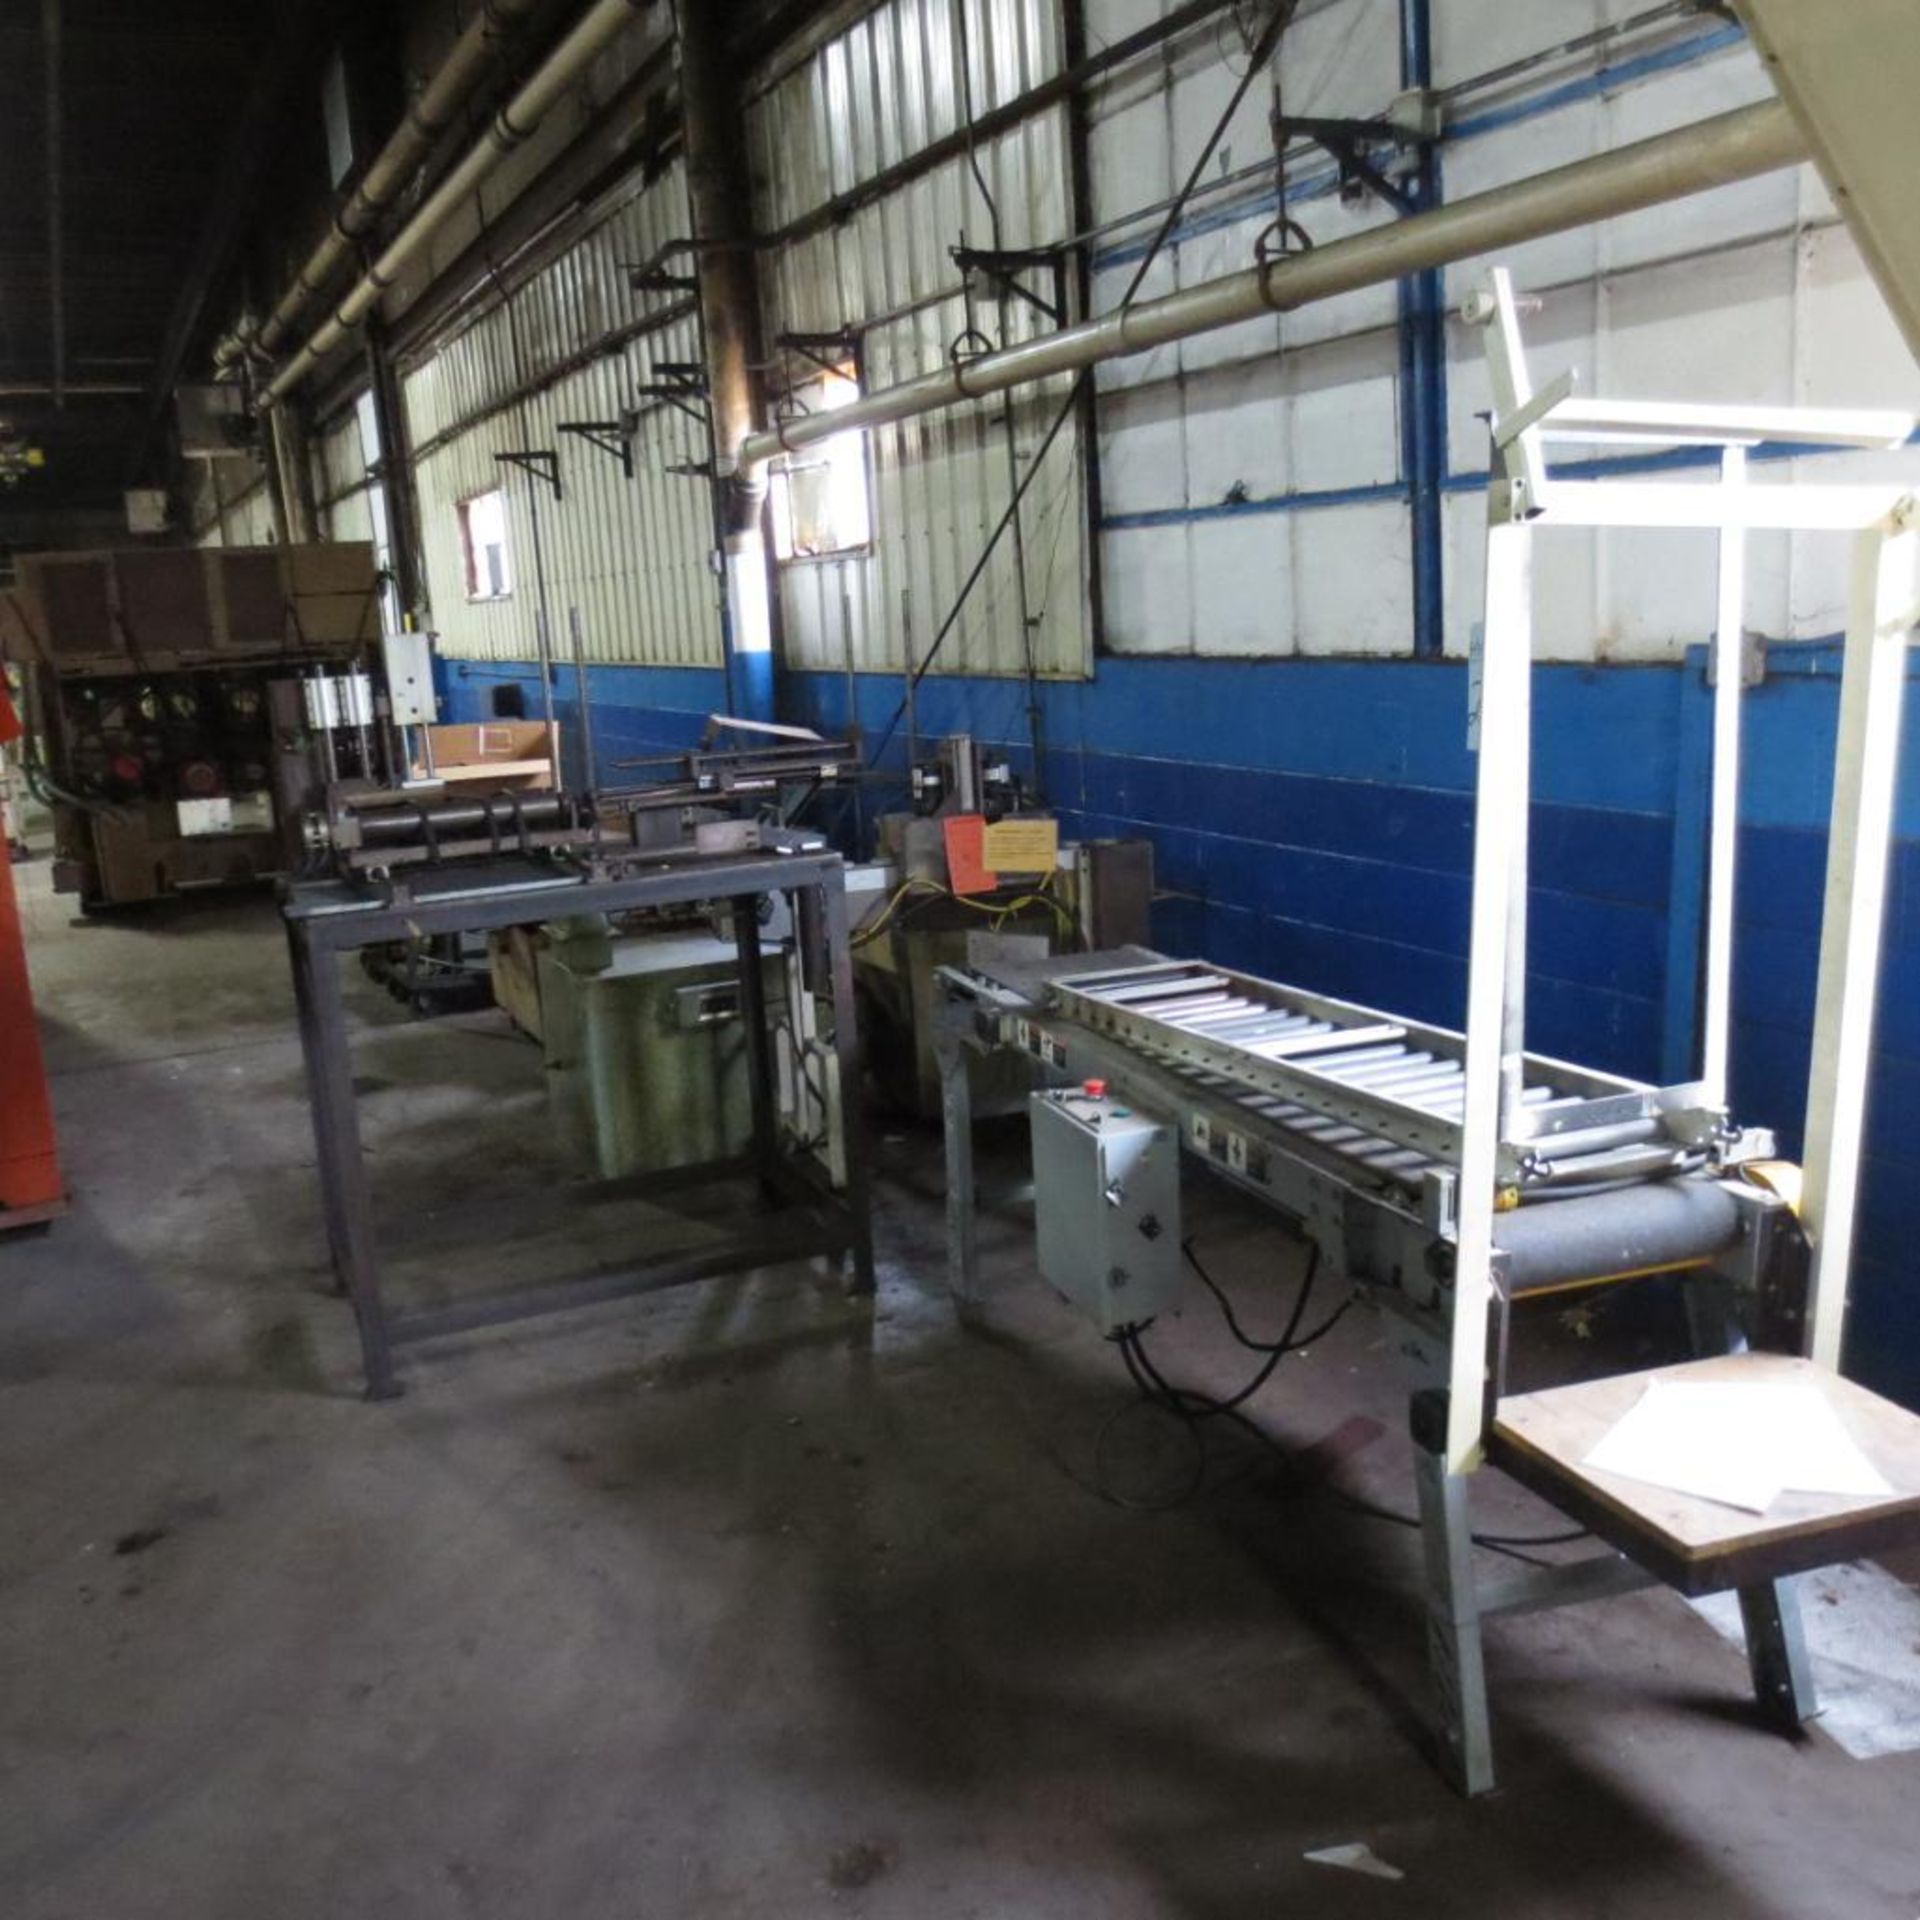 Conveyor and Parts. Loading Fee is $150.00